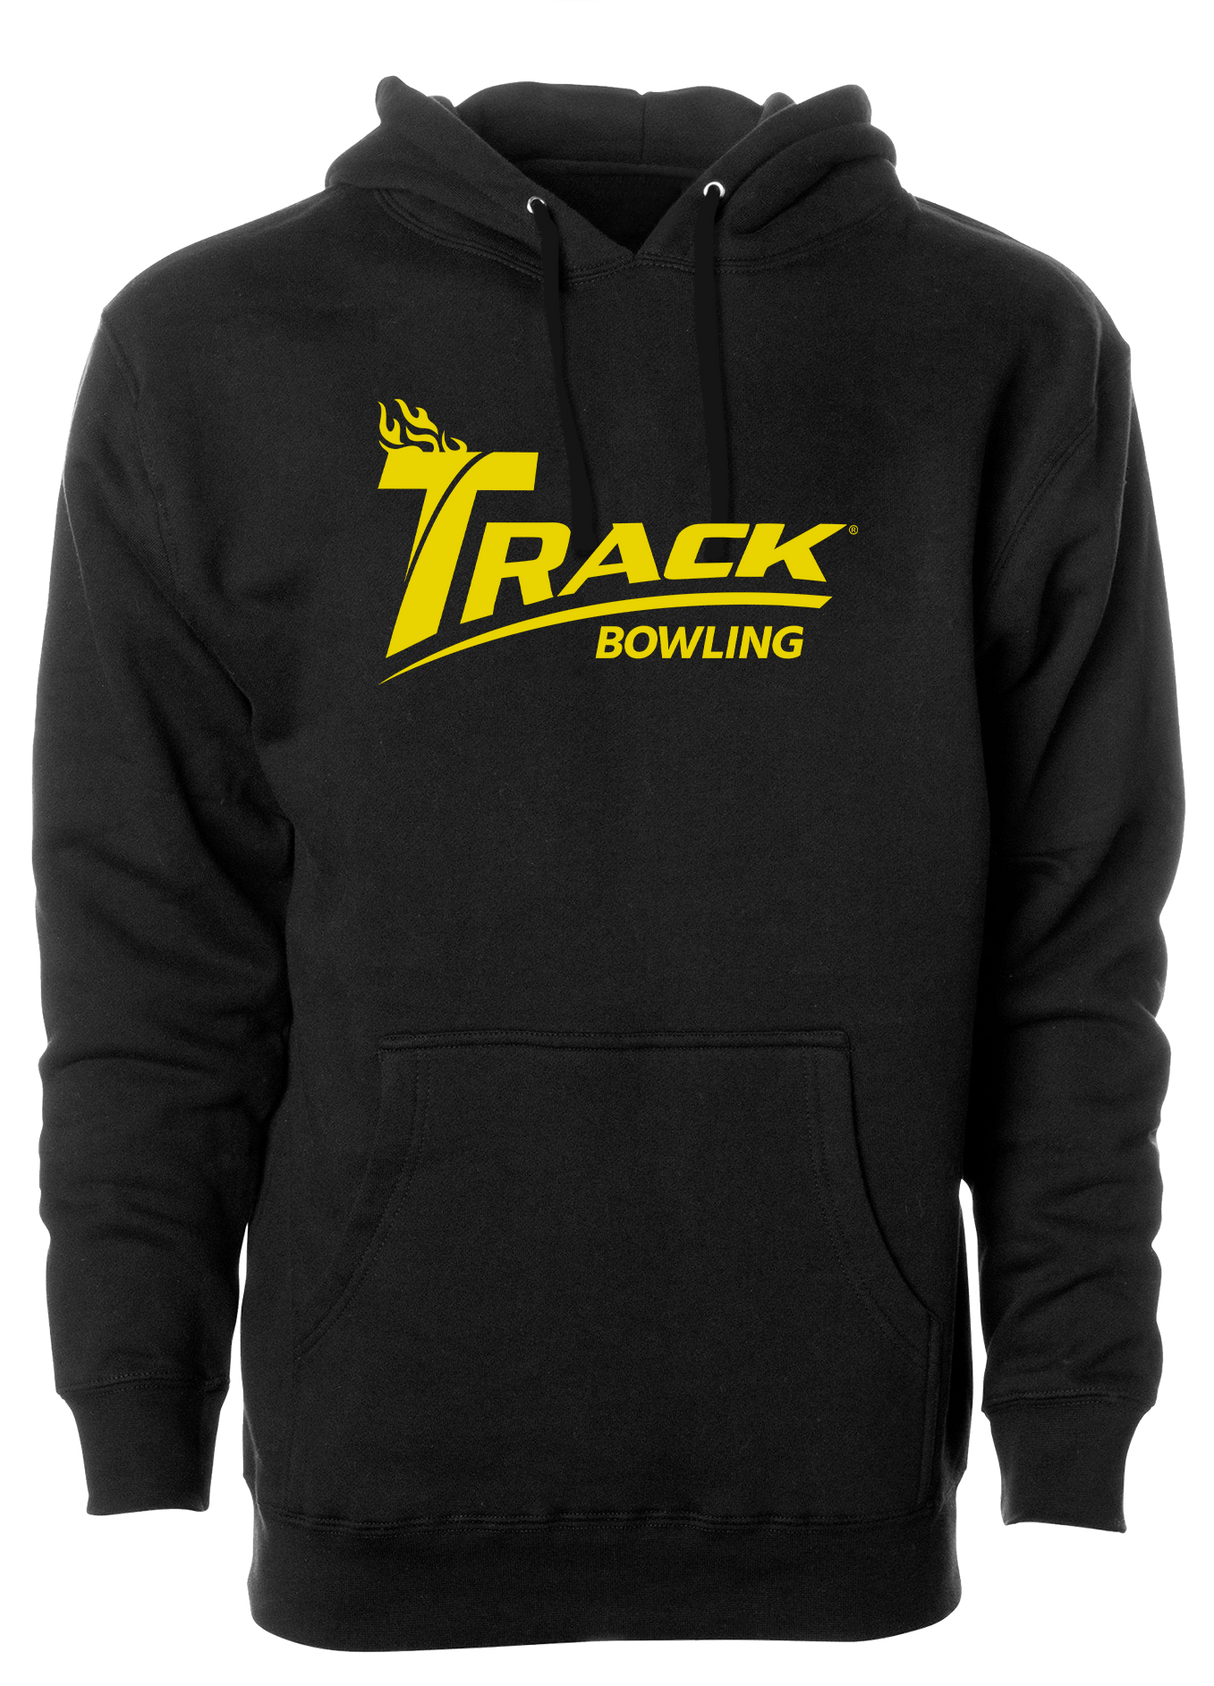 Keep warm in this stylish Track Classic design hooded sweatshirt. #TrackBowling #EvolutionaryRevolutionary 60/40 cotton/polyester blend material Standard Fit - Men's Sizing Jersey-lined hood Split-stitched double-needle sewing on all seams Twill neck tape 1x1 ribbing at cuffs & waistband Metal eyelets Front pouch pocket Midweight Hoodie/Hooded Sweatshirt